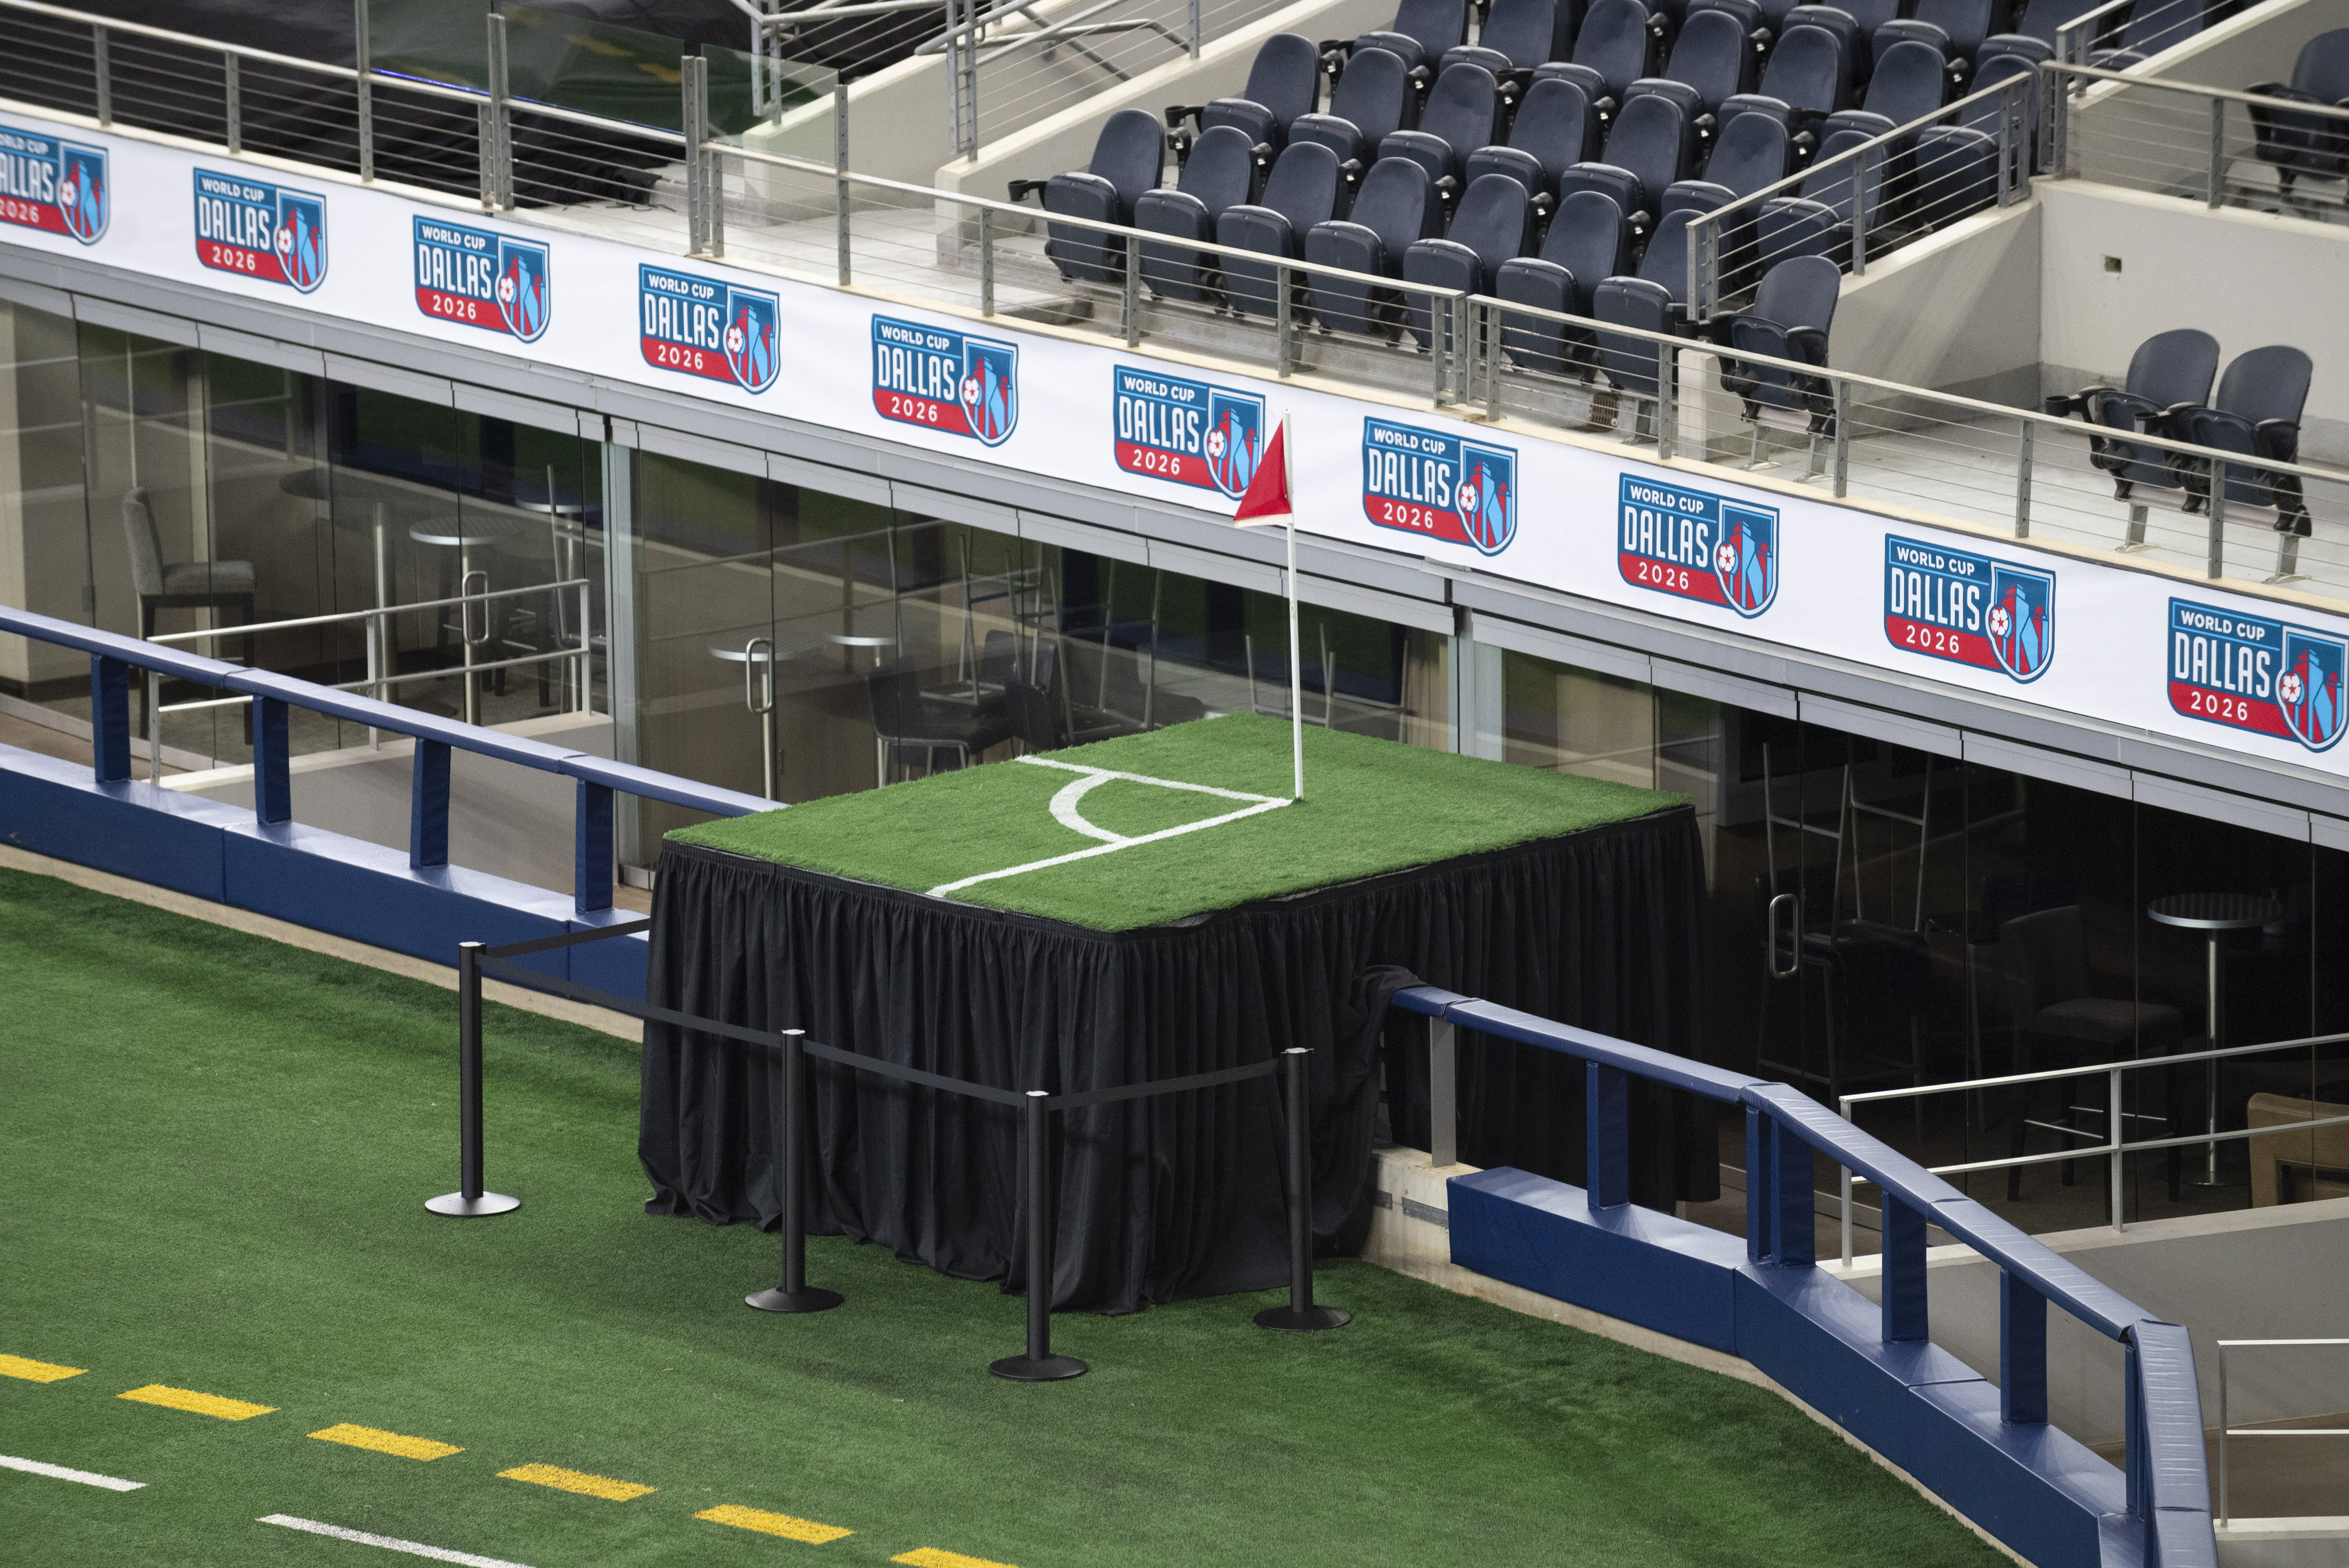 Photos: Local stakeholders pitch AT&T Stadium, Dallas-area to FIFA  delegates for 2026 World Cup matches